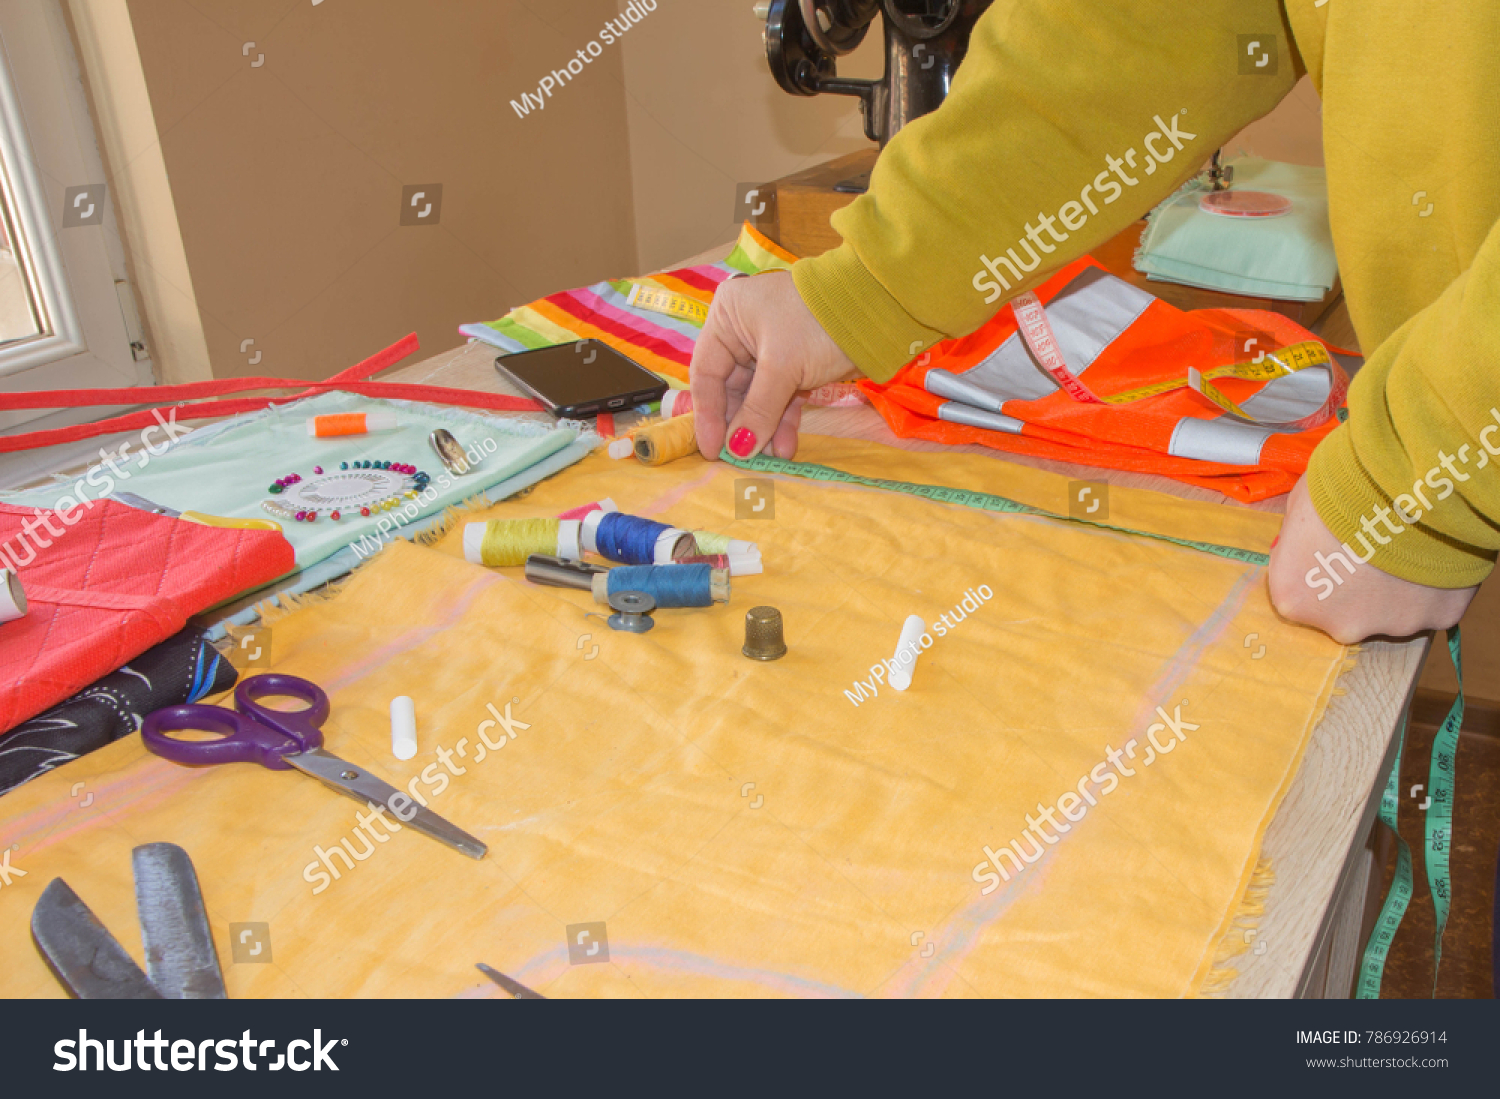 Fashion designer, Woman tailor posing at her workplace with cut fabric, free space on wooden work table. Garment industry, tailoring concept #786926914